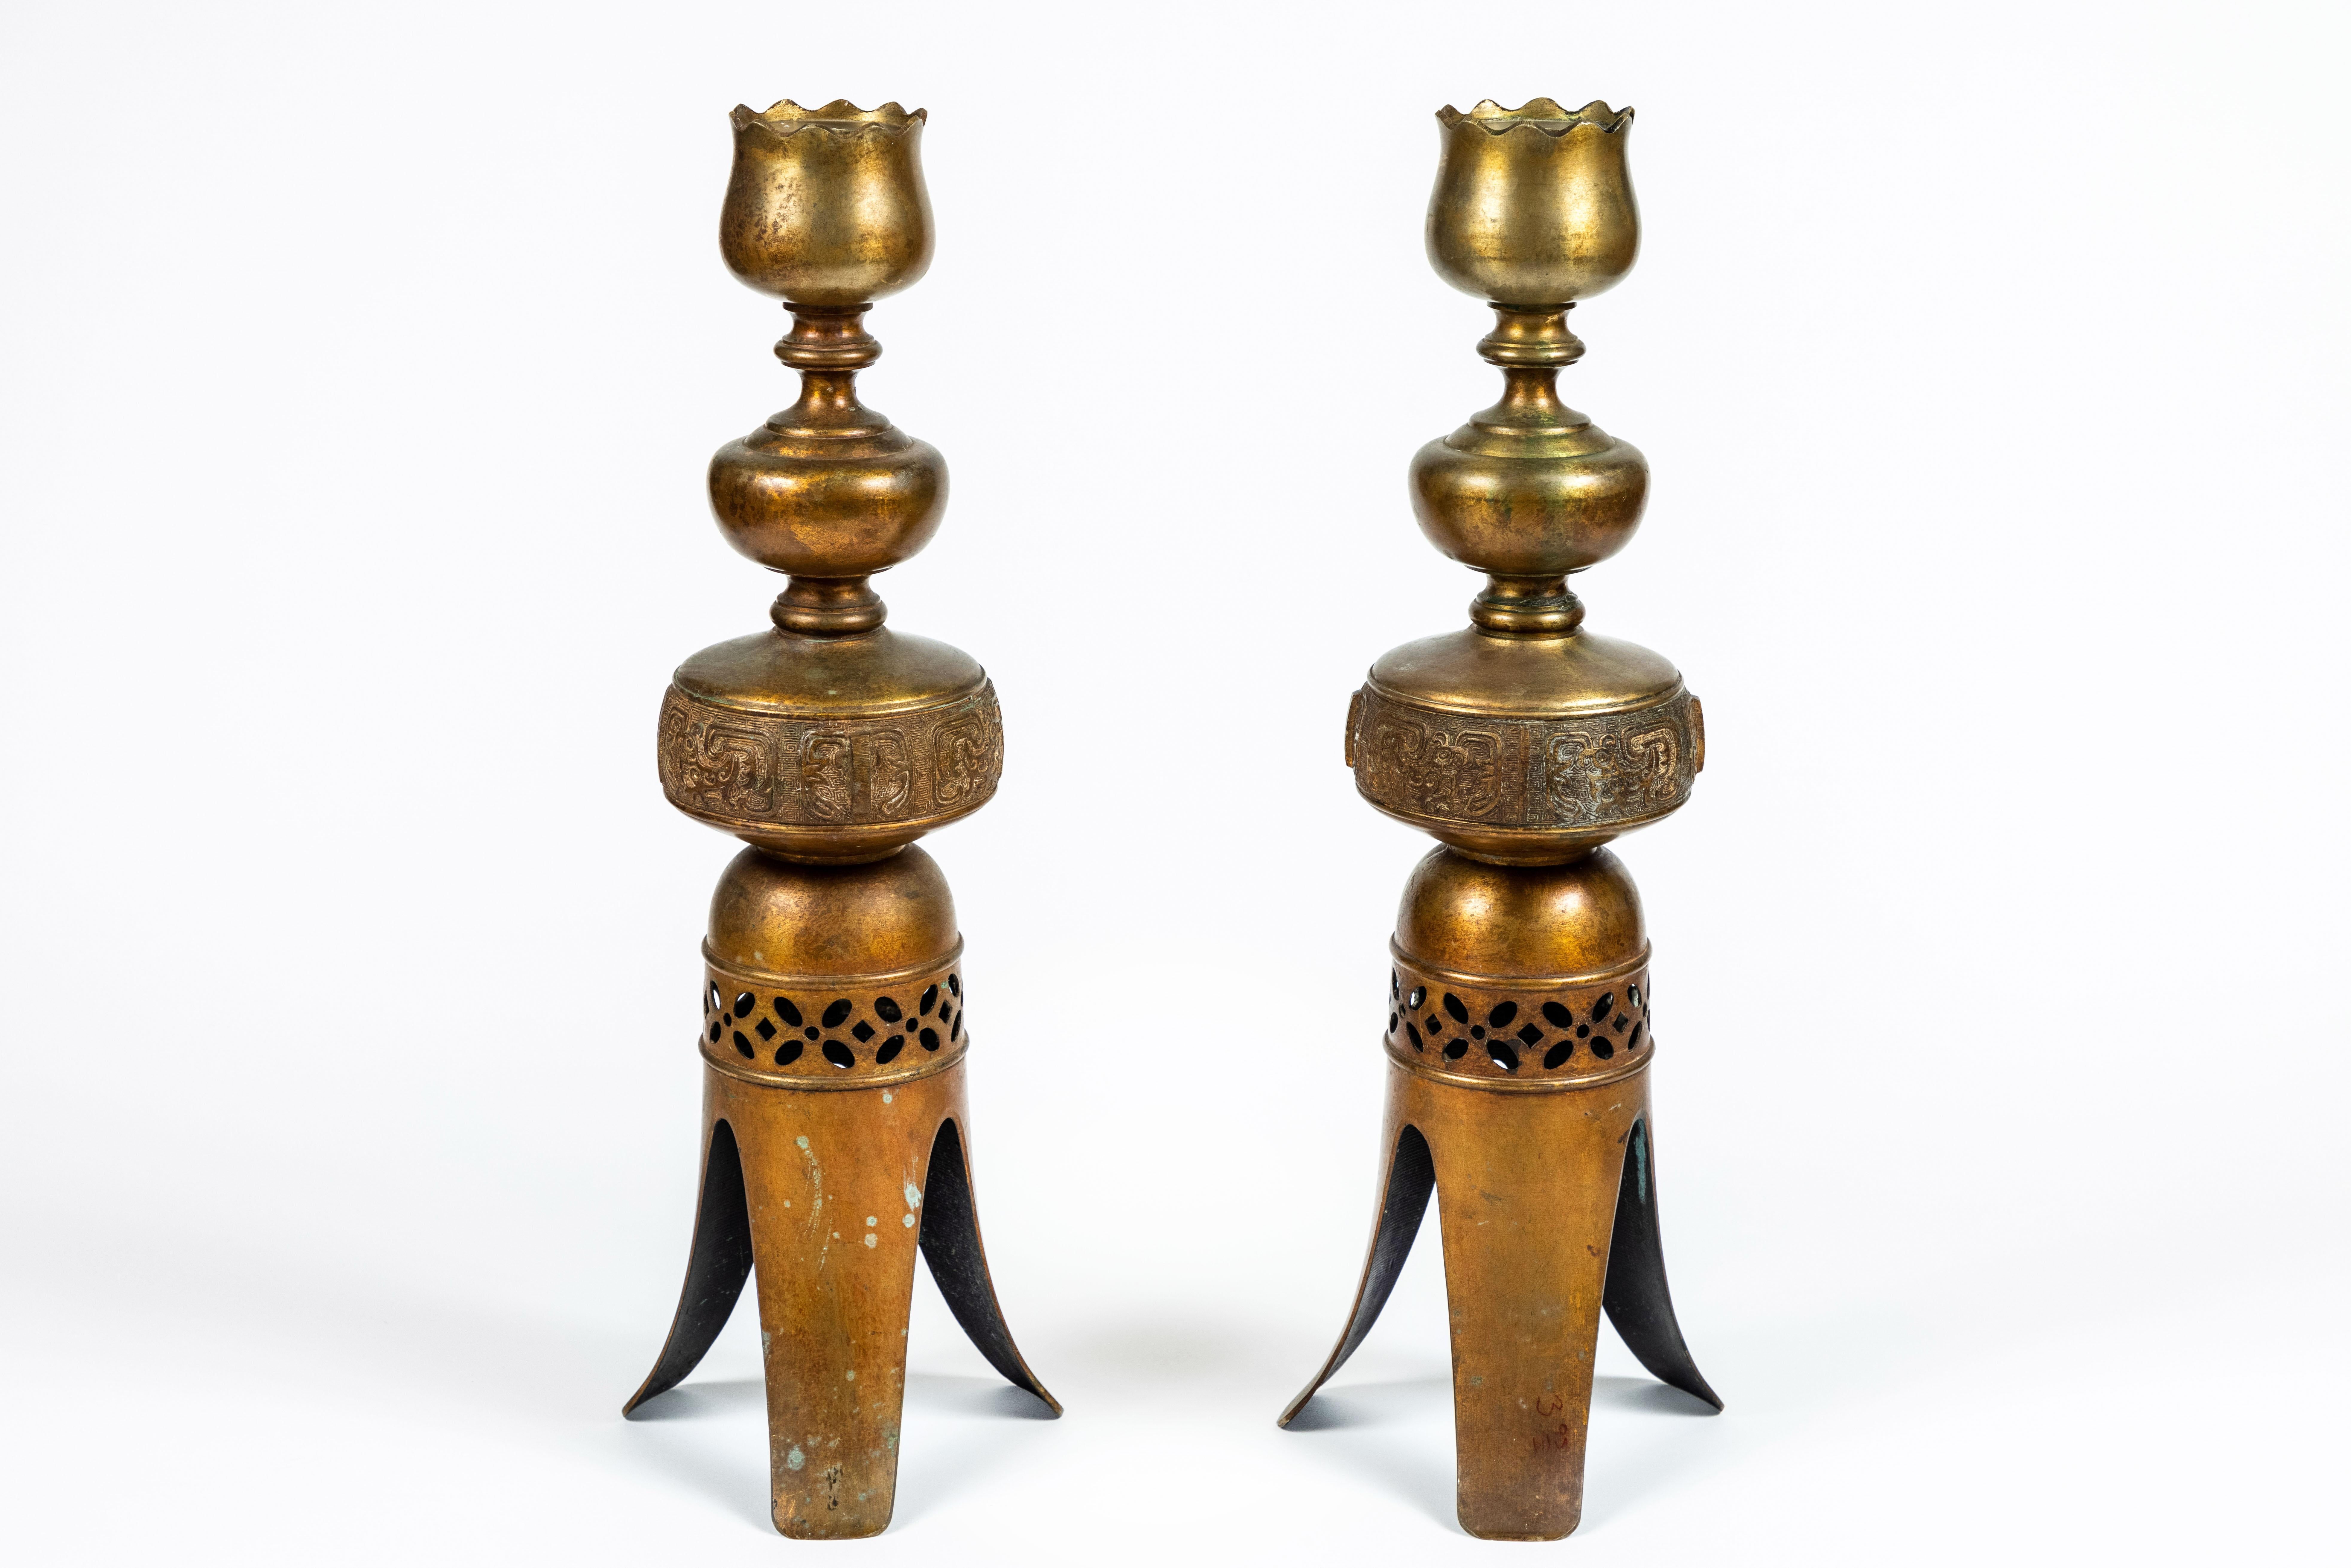 A pair of outstanding tall vintage intricately decorated metal candleholders with gold finish, 3-leg base with pierced design accent and possible Peruvian motif center detailing. Measures: 20.5